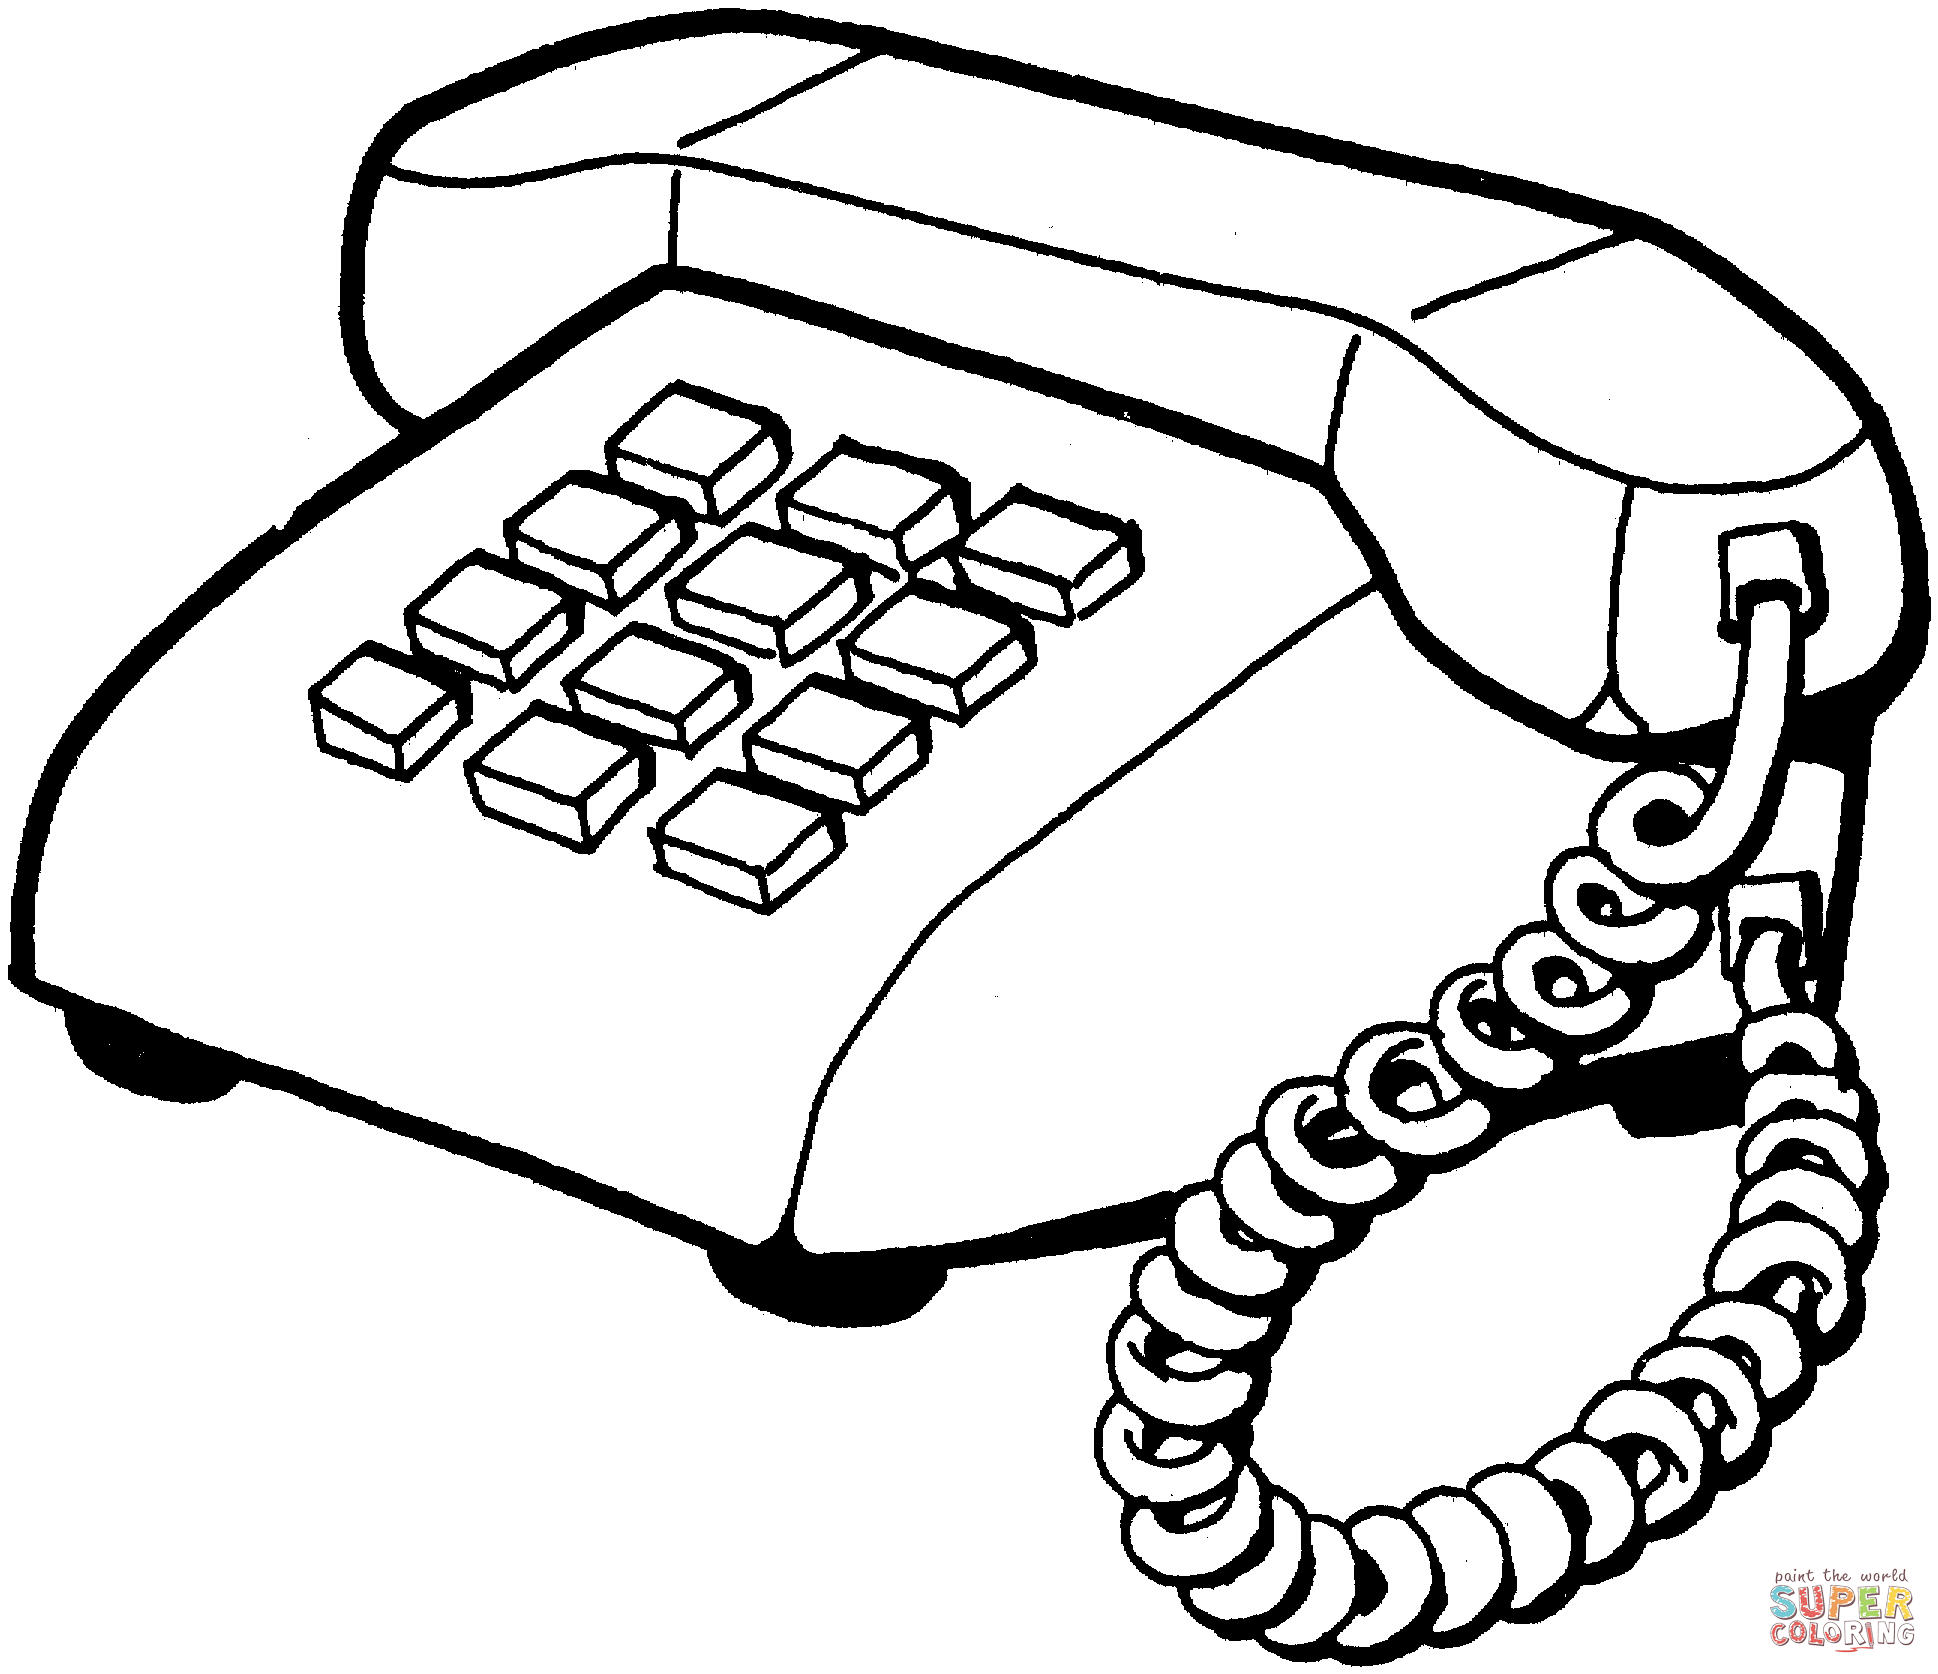 Telephone device coloring page | Free Printable Coloring Pages